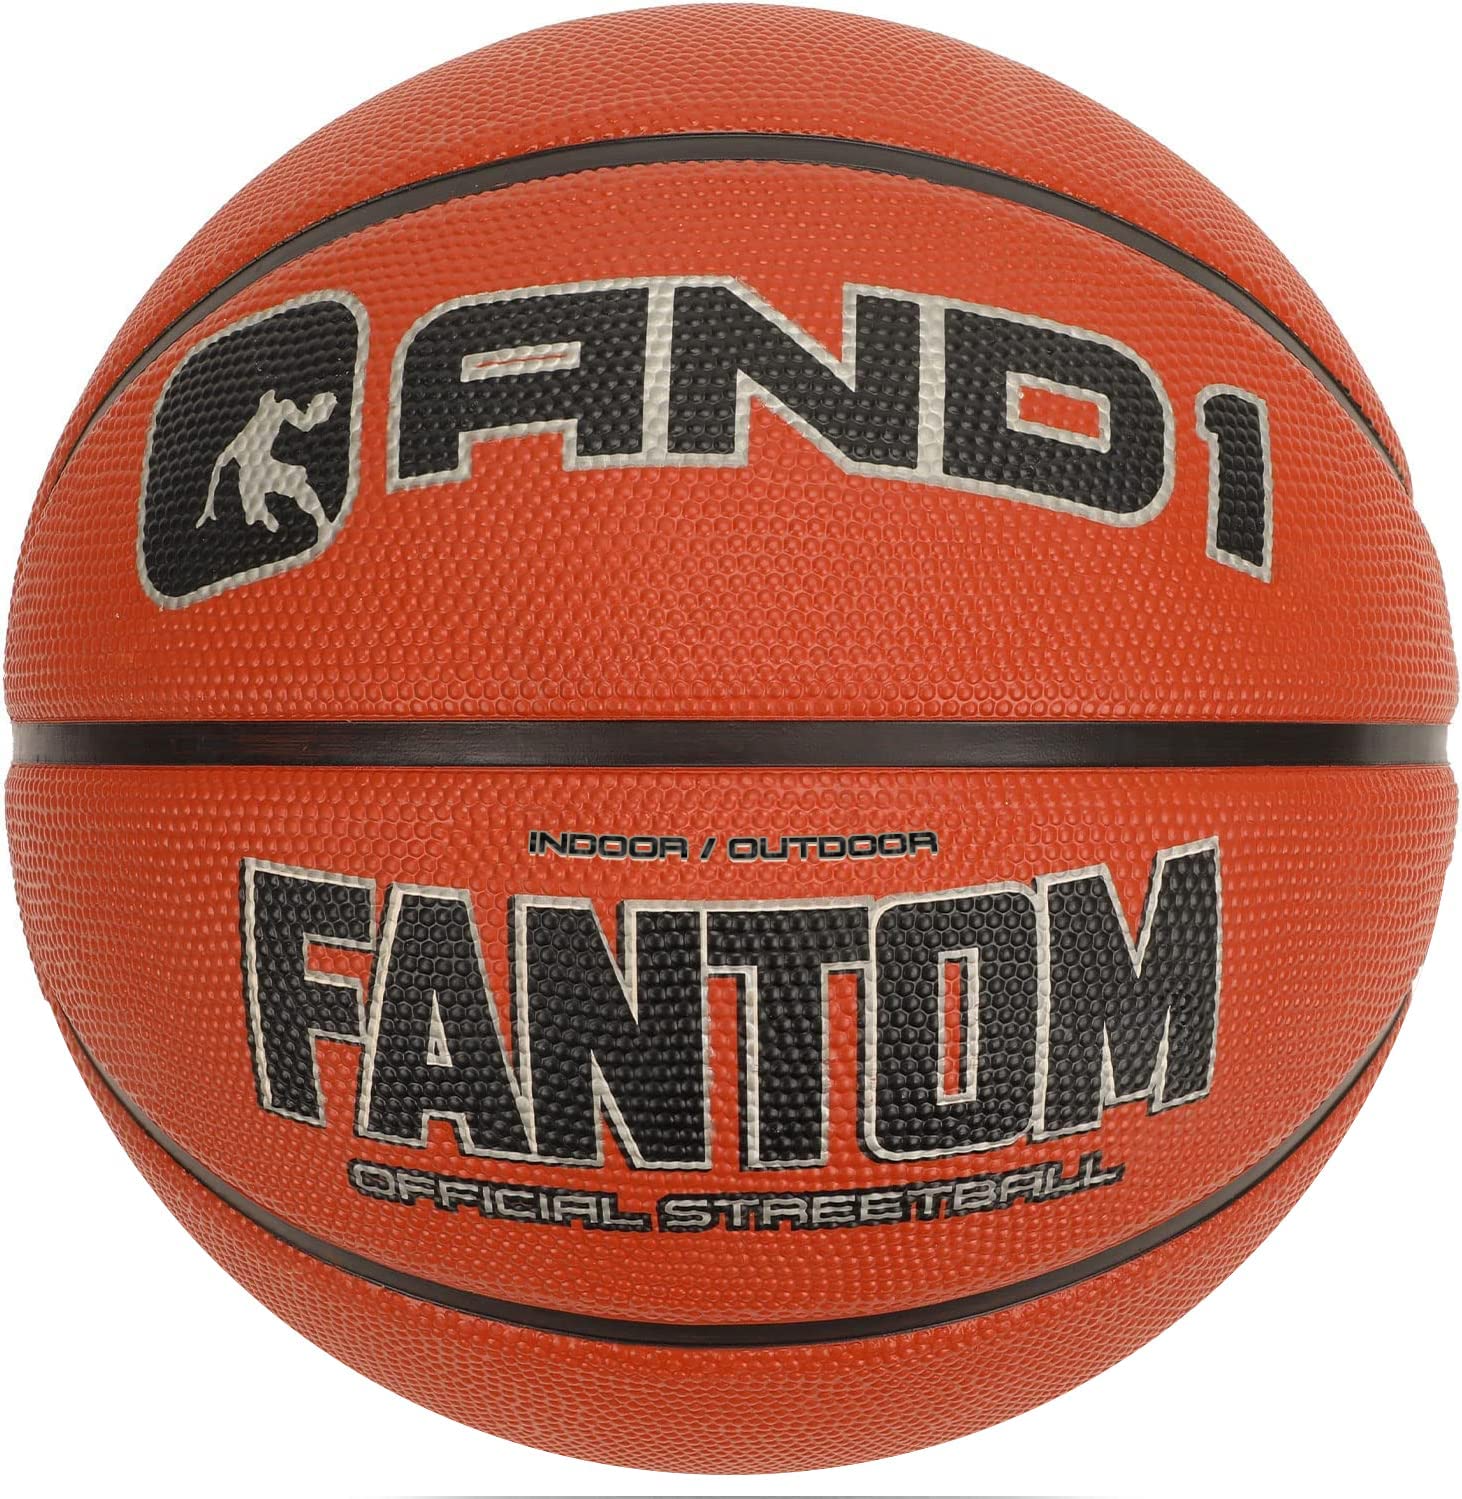 AND1 29.5" Fantom Full Size Rubber Basketball (Black) $5 + Free Shipping w/ Prime